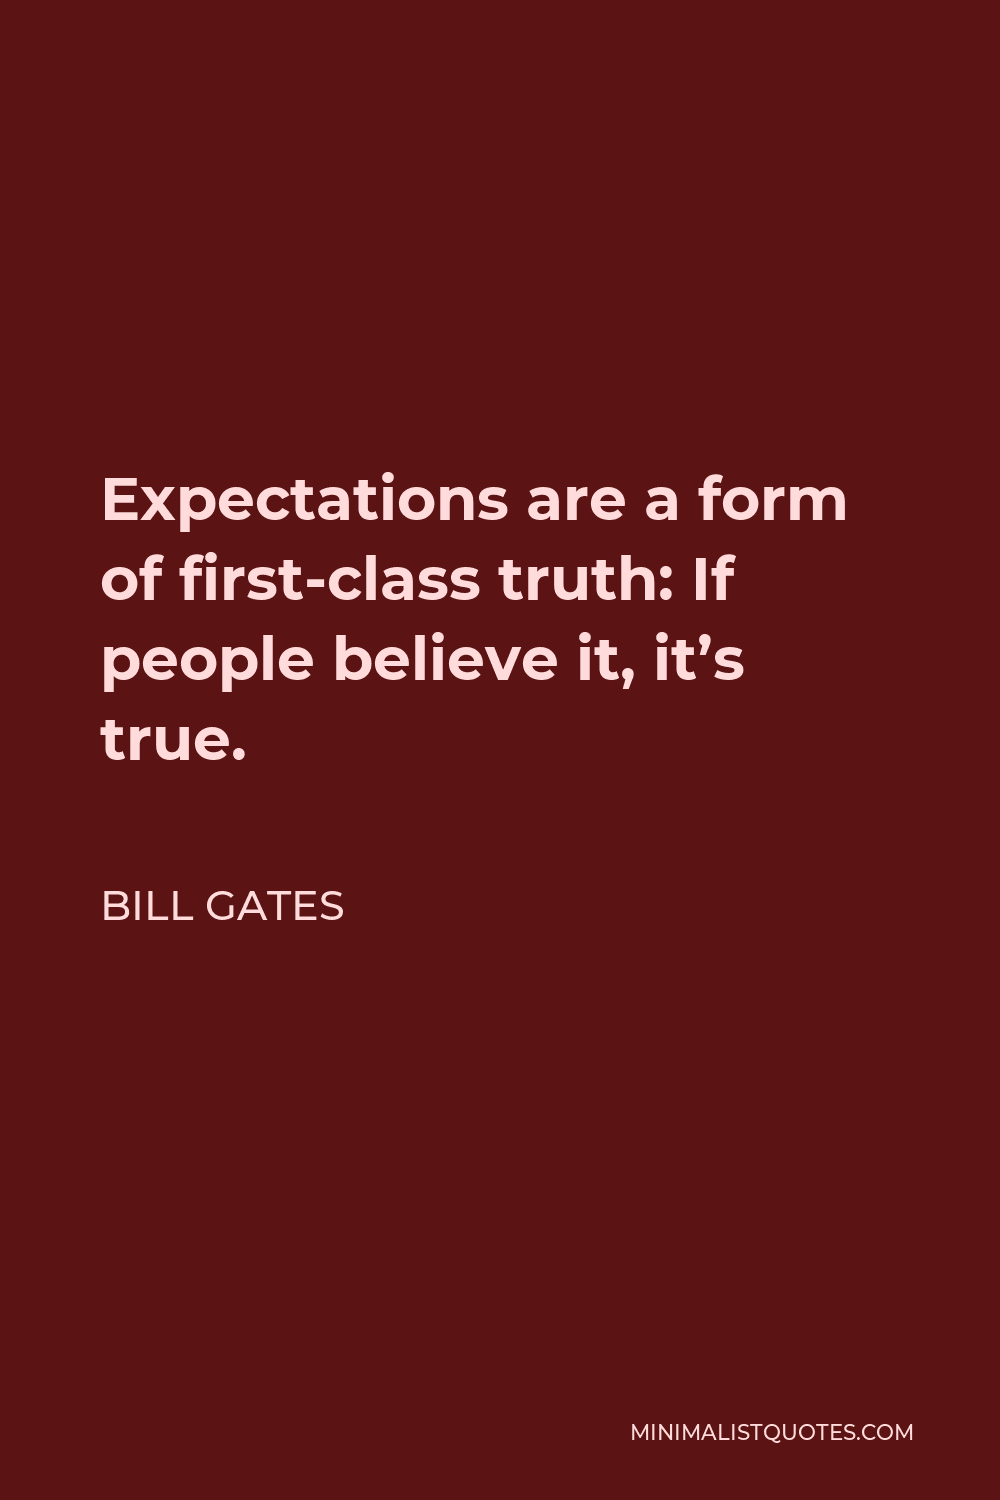 Bill Gates Quote - Expectations are a form of first-class truth: If people believe it, it’s true.